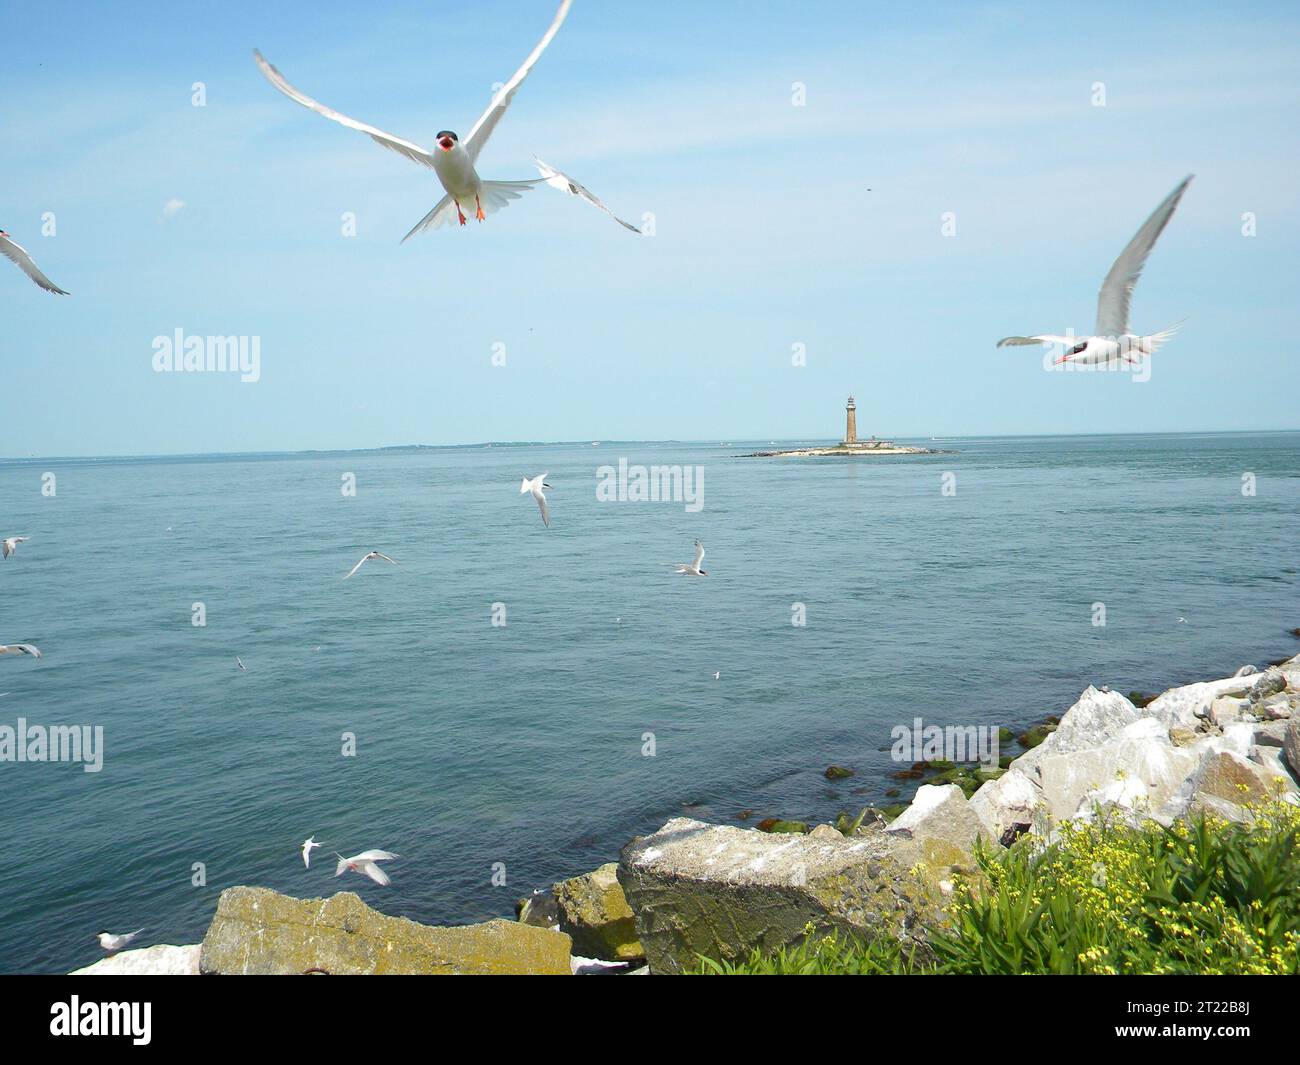 Roseate terns in flight at Great Gull Island, New York. A lighthouse on a small island is in the background. Subjects: Birds; Emergency Listing, Endangered; Islands. Location: New York.  . 1998 - 2011. Stock Photo